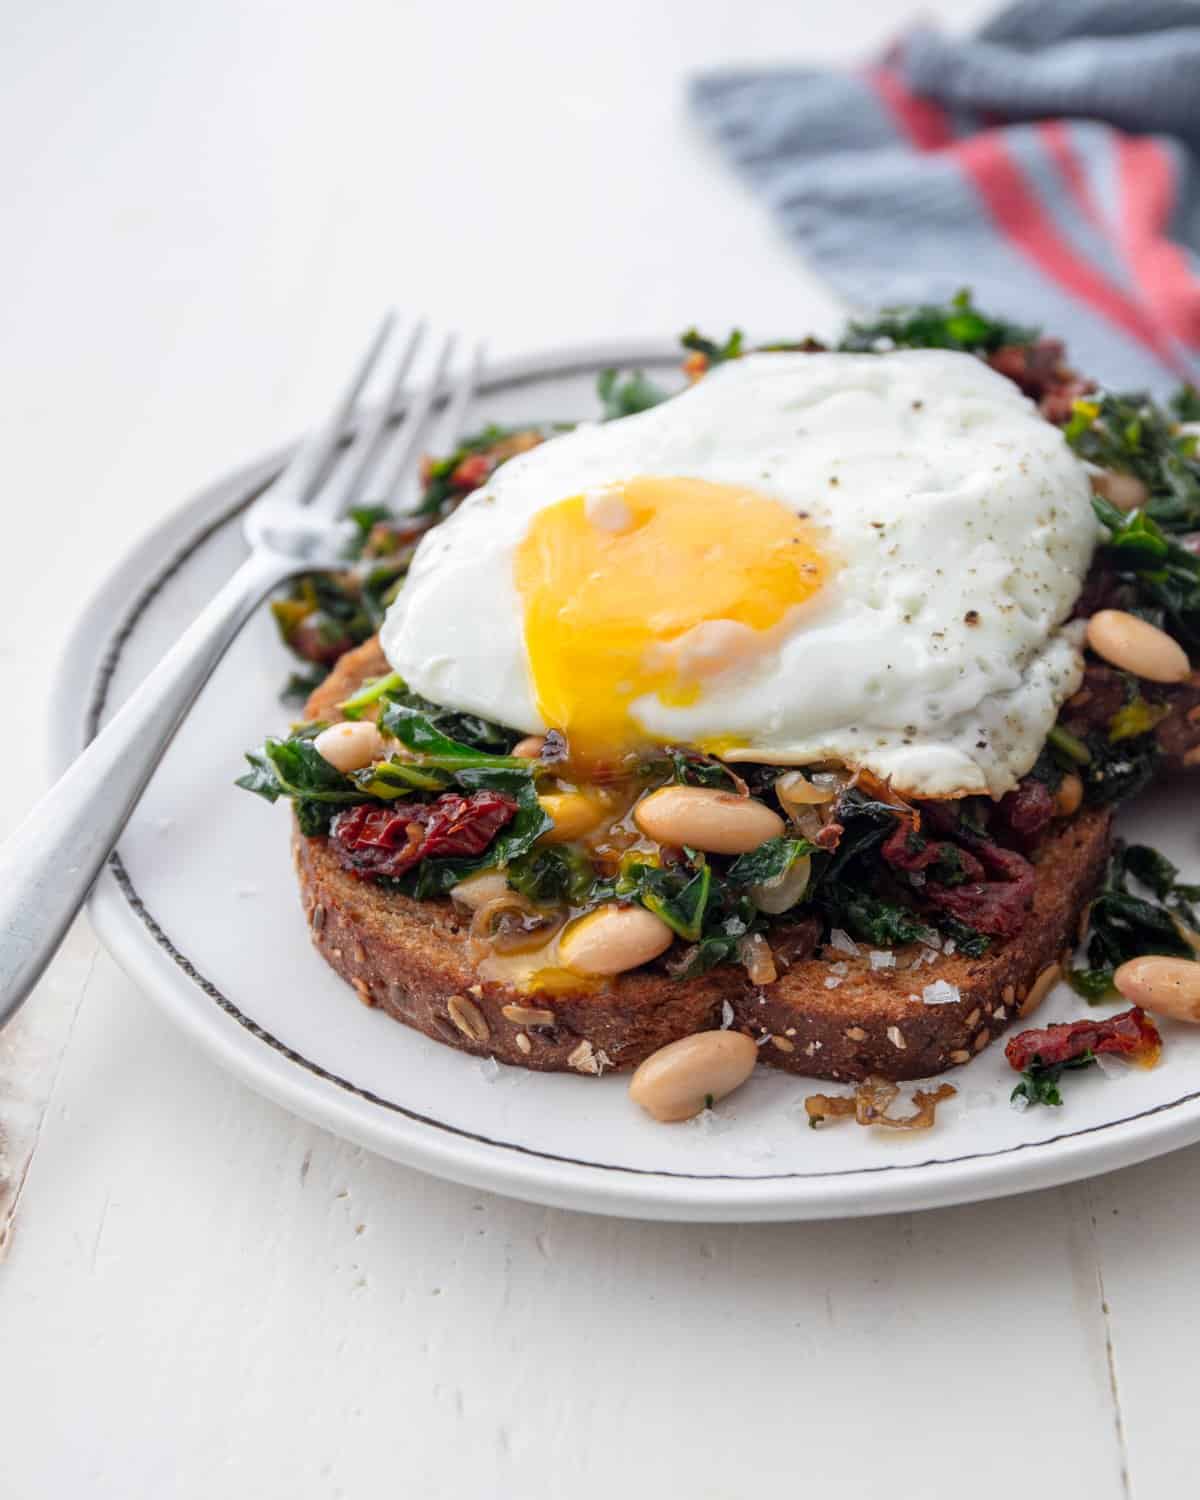 Serving and Enjoying Braised Kale, Bacon and Egg on Toast